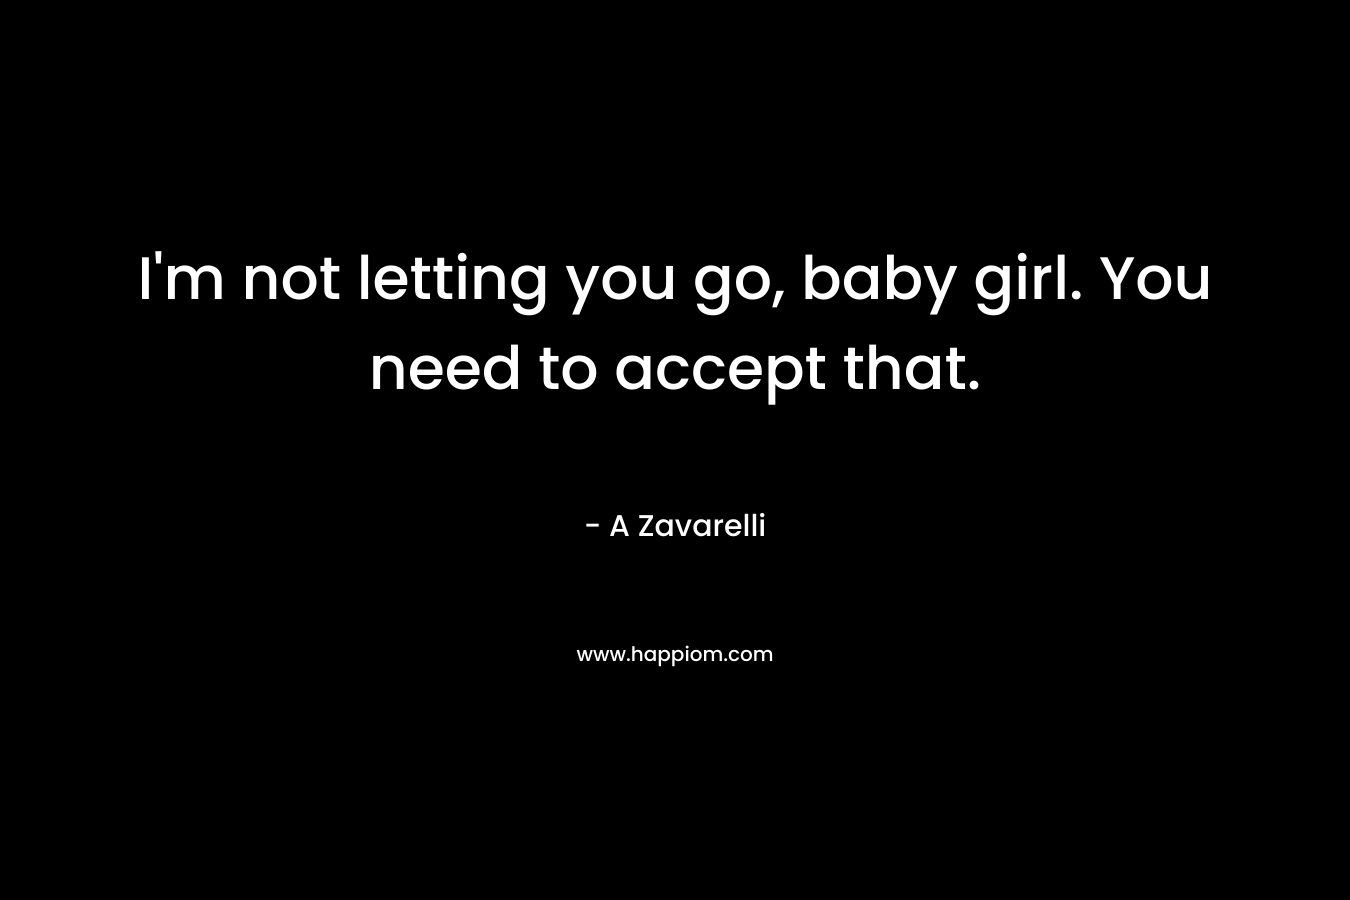 I’m not letting you go, baby girl. You need to accept that. – A Zavarelli